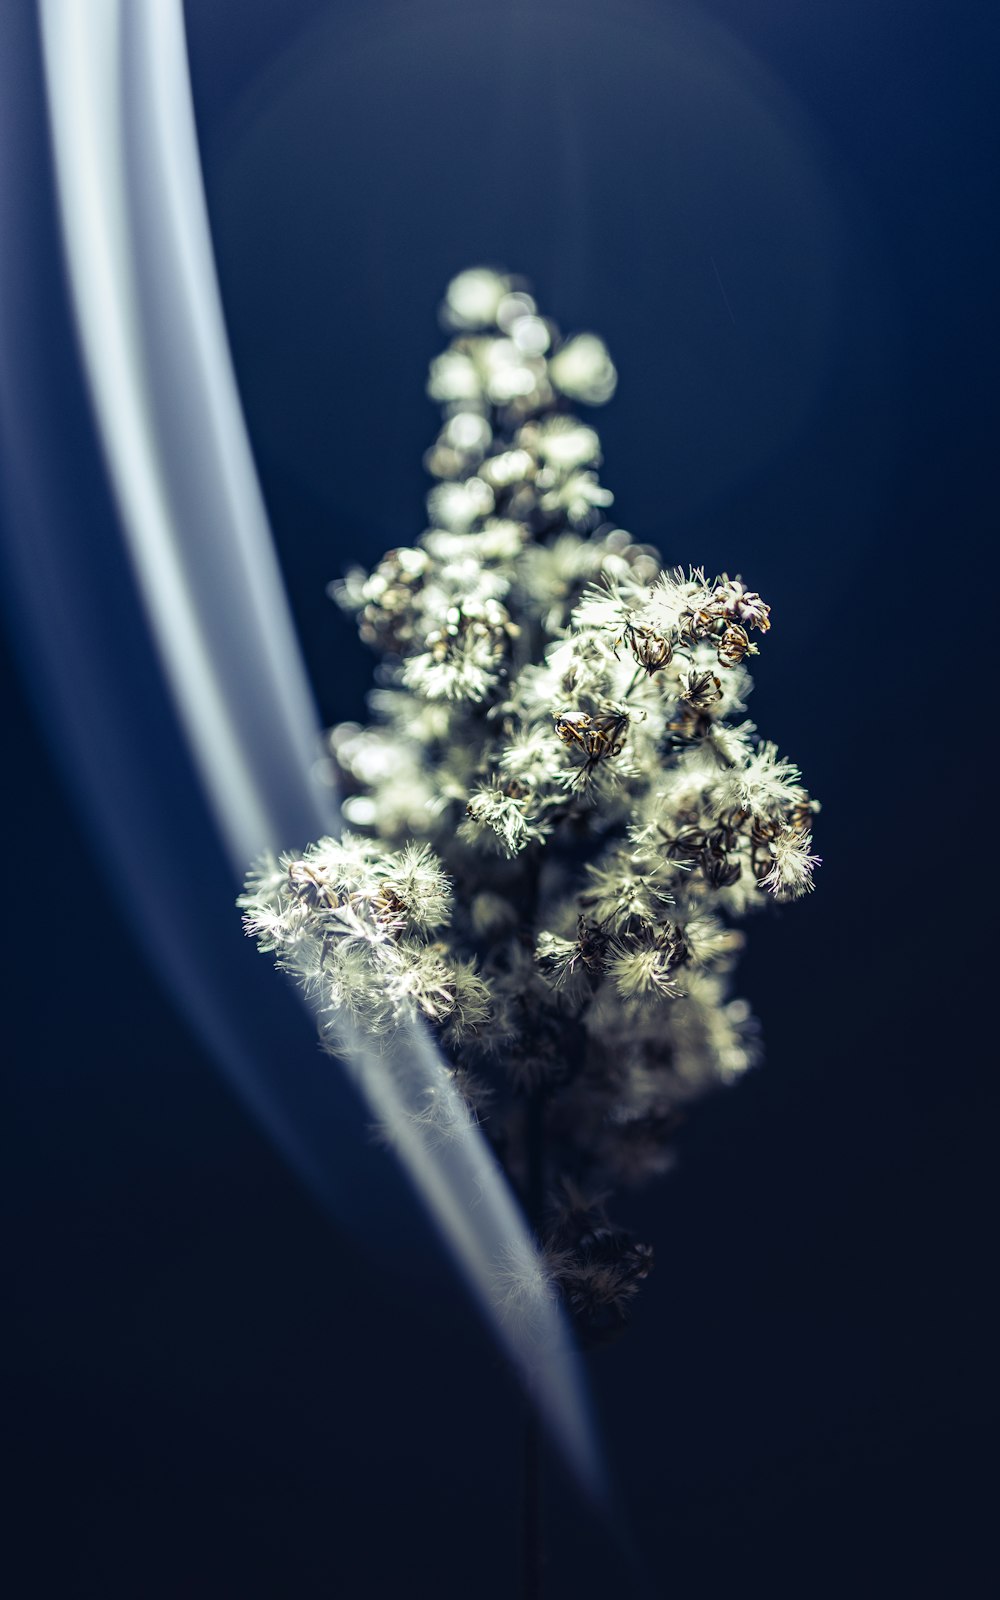 a plant with white flowers in a dark room